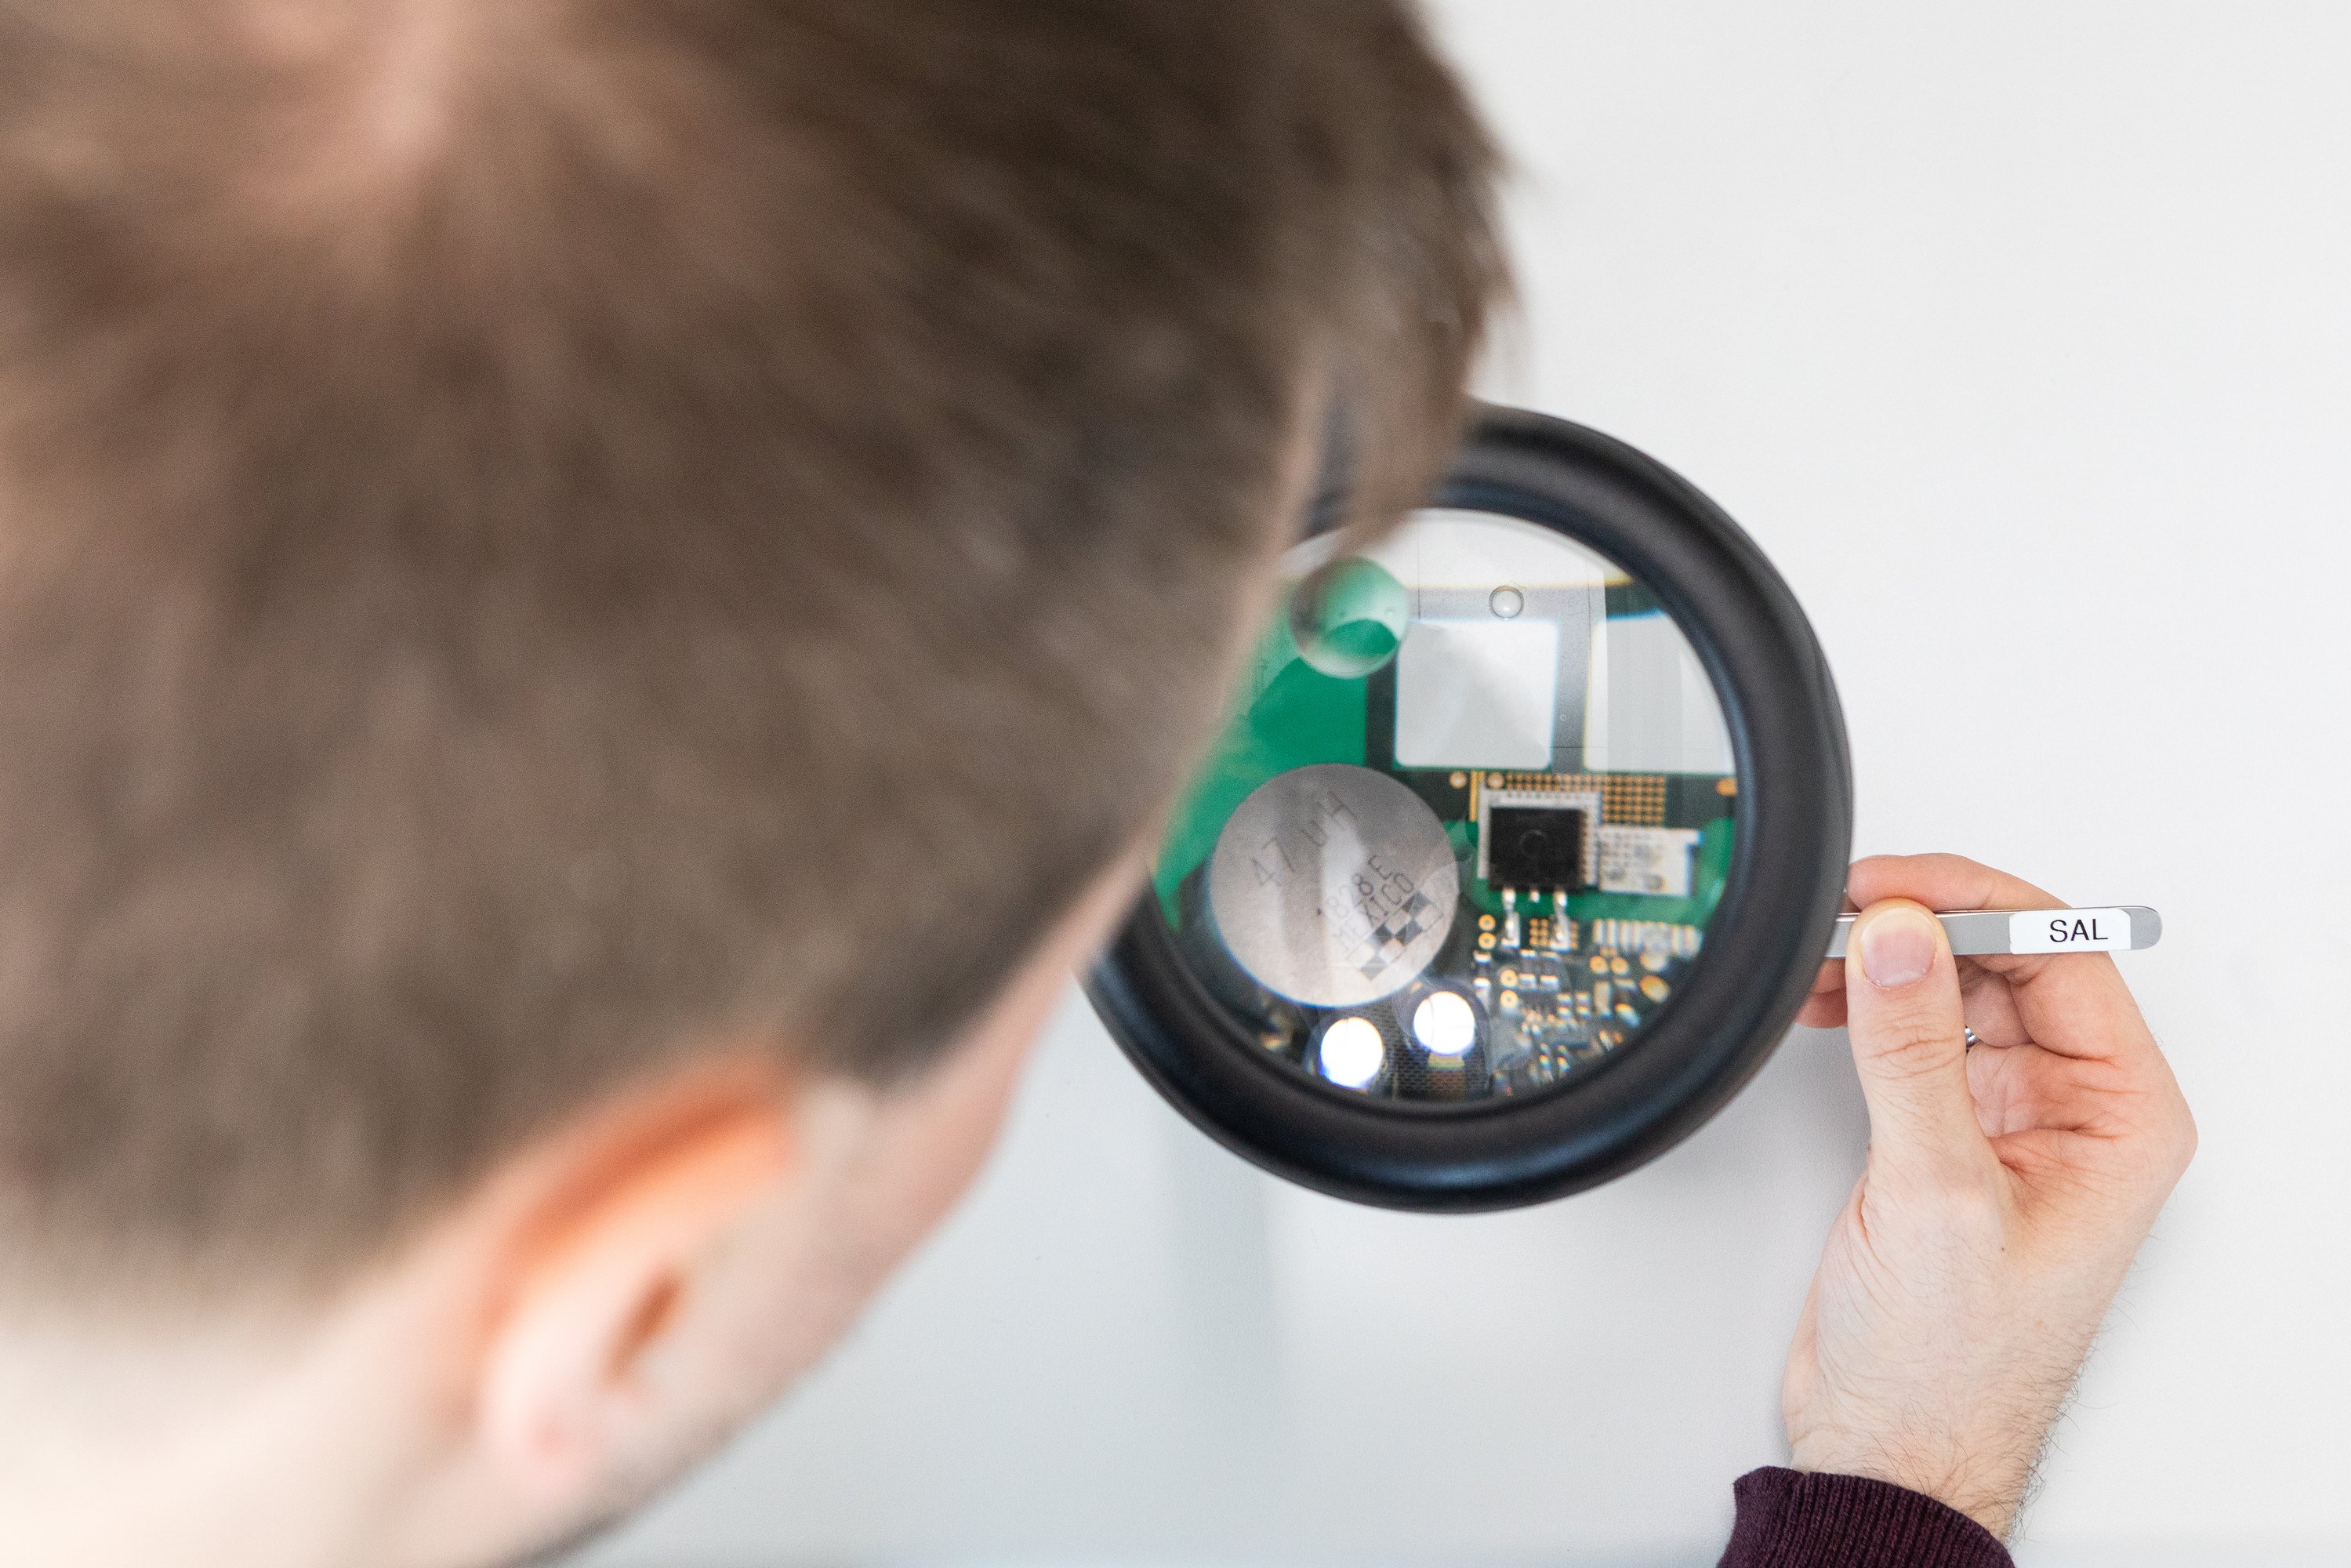 researcher is working on a printed circuit board, looking through a magnifying glass